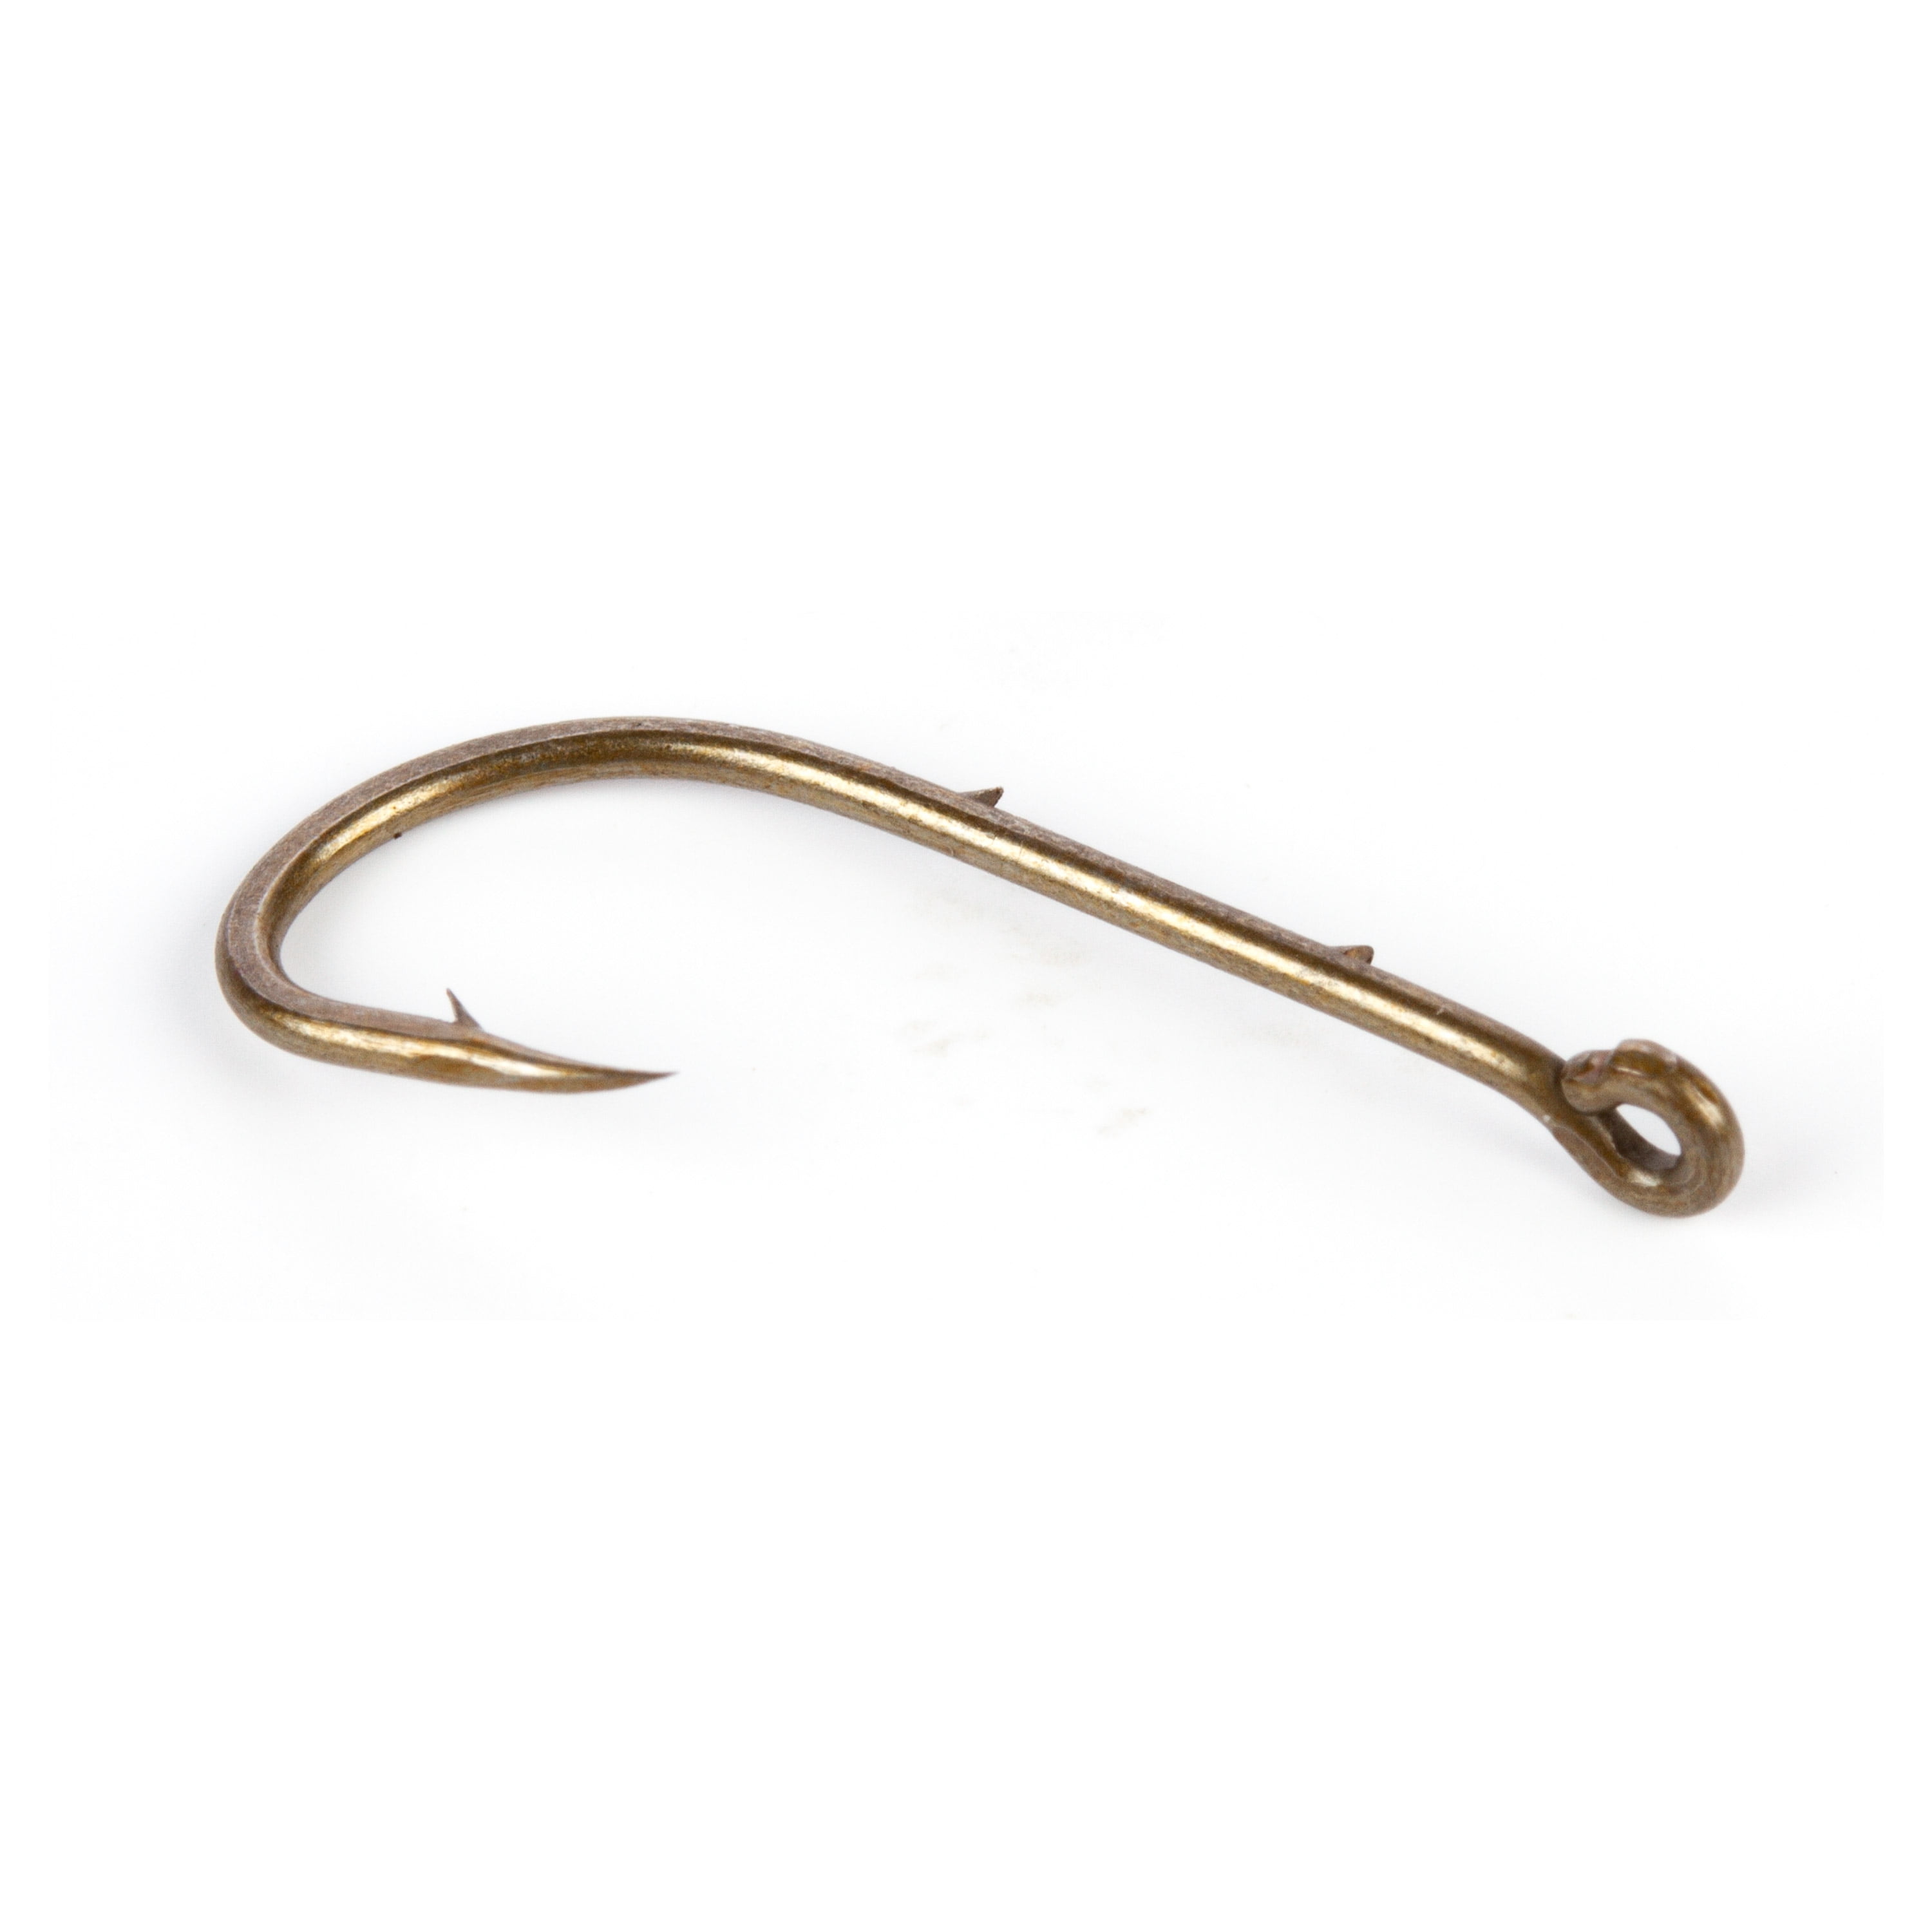 144 count, BRONZE TREBLE HOOKS, SIZE #2,or #4, or #6, or #8 Danco stock No.  572